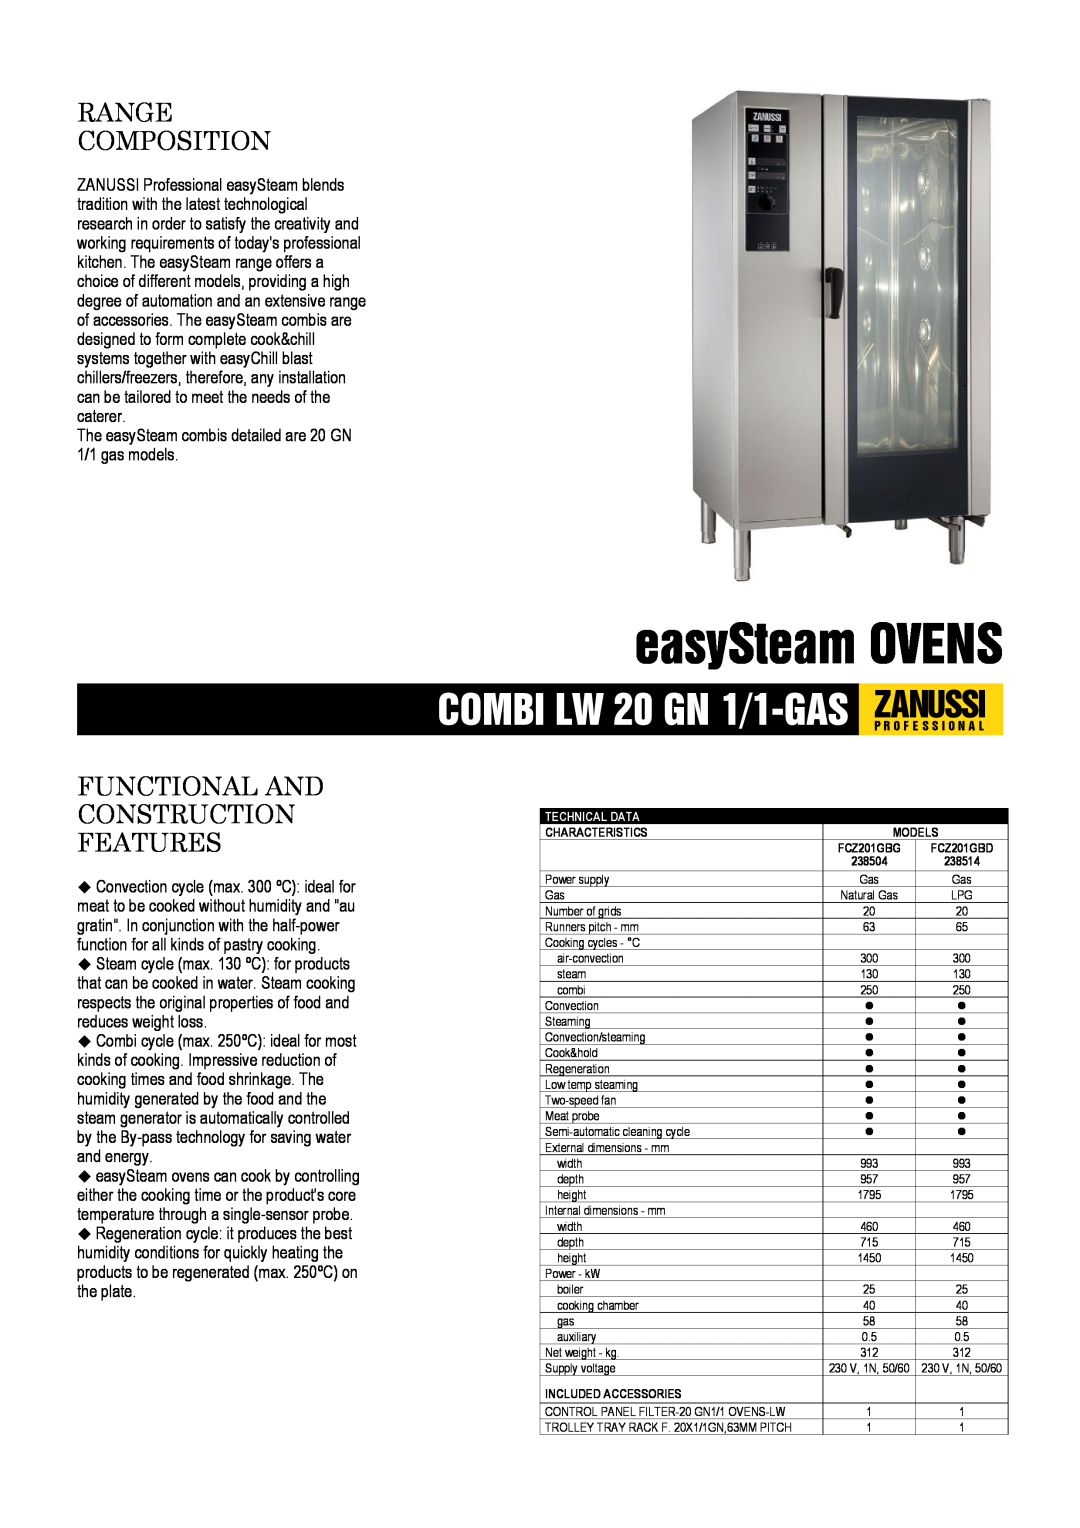 Zanussi 238514, 238504, FCZ201GBD dimensions easySteam OVENS, Range Composition, Functional And Construction Features 